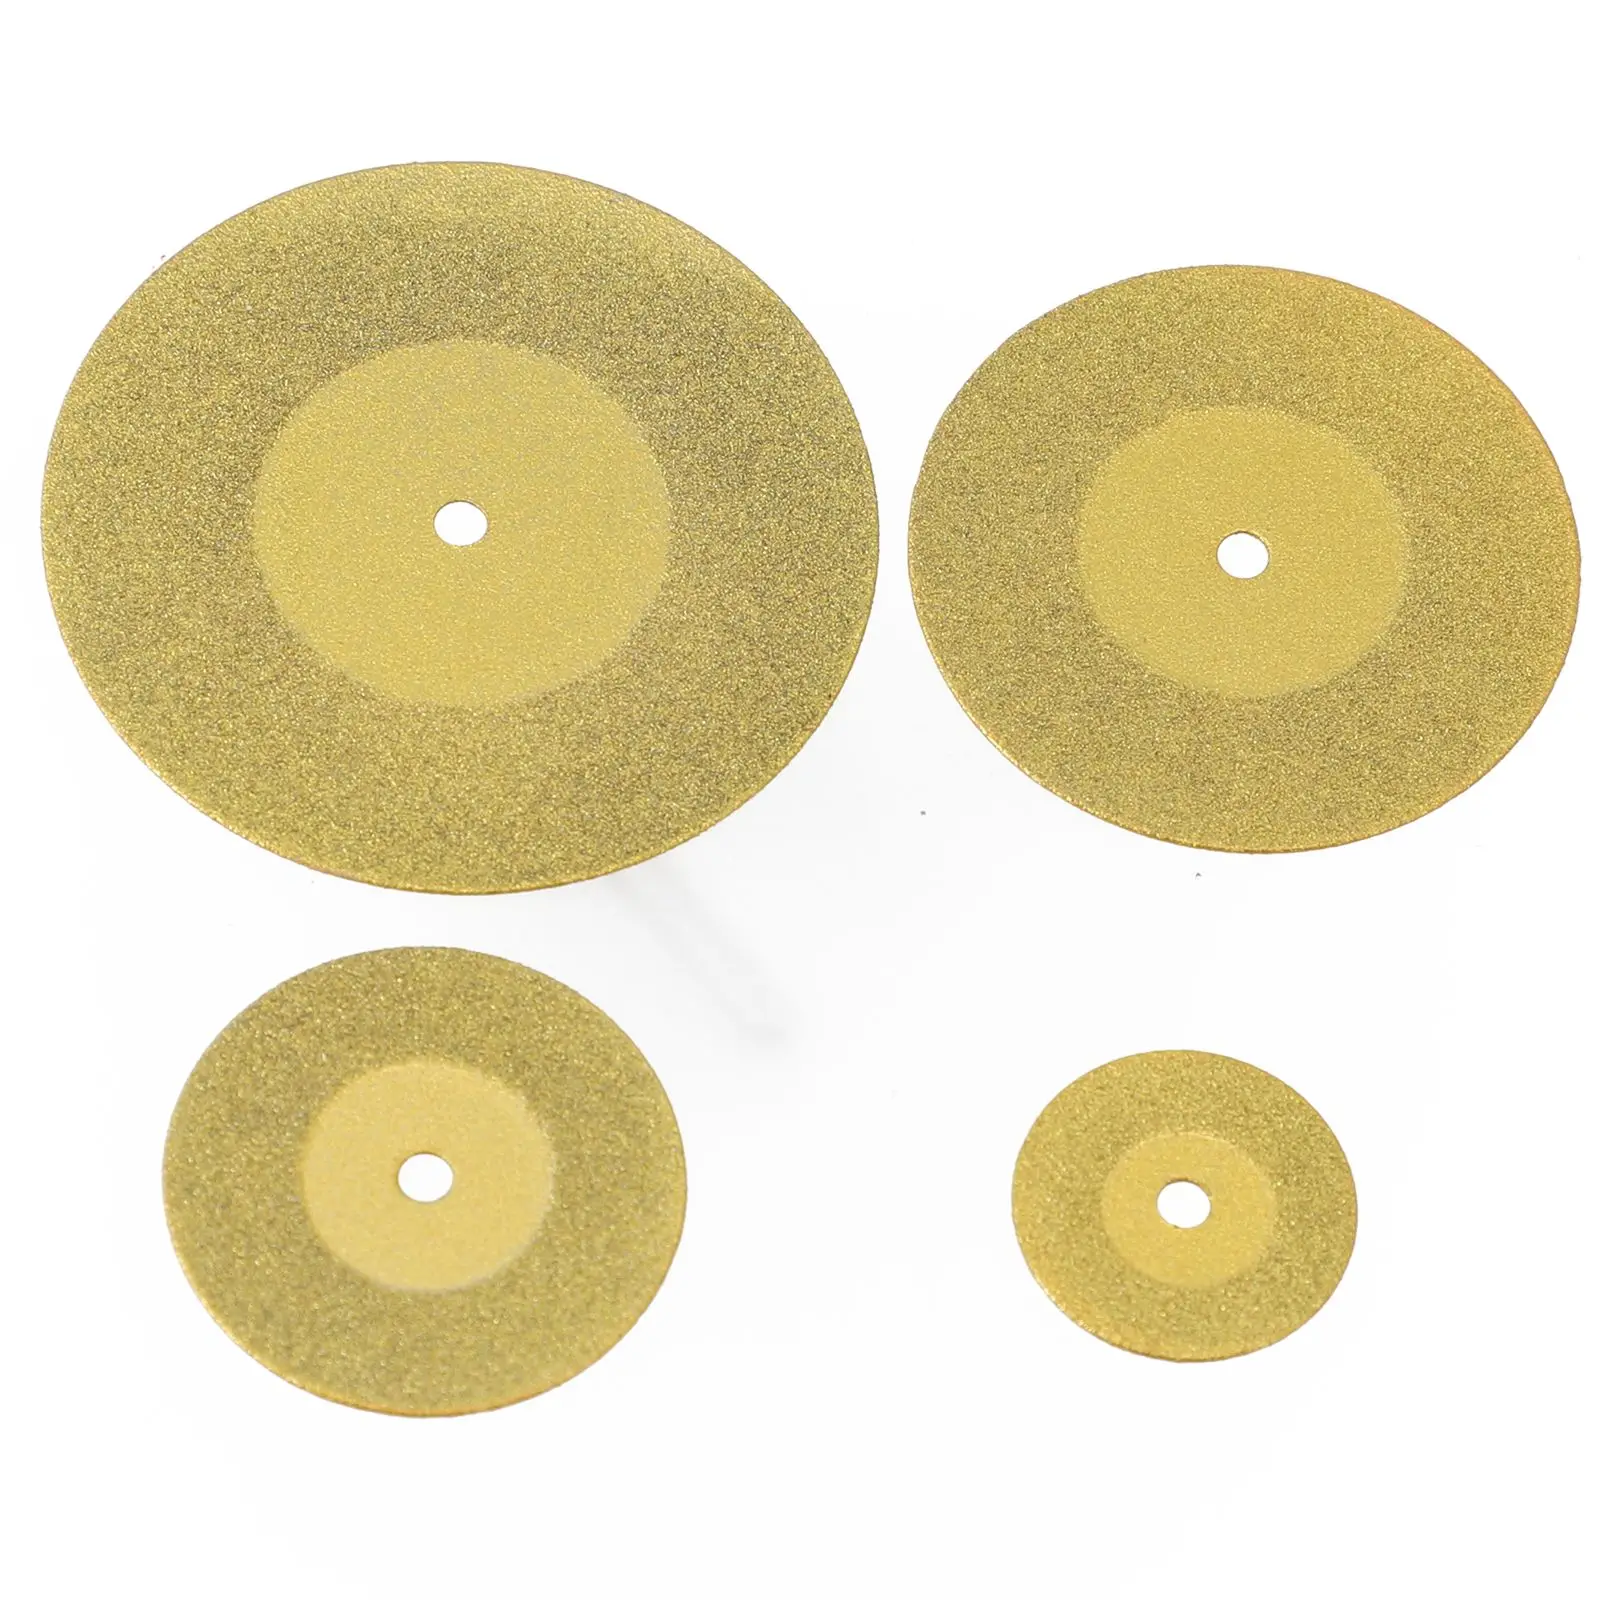 

4pcs Diamond Cutting Disc With Connecting Rod TiN Coated Circular Saw Blade For Cutting Wood Glass Plastic Rotary Tools